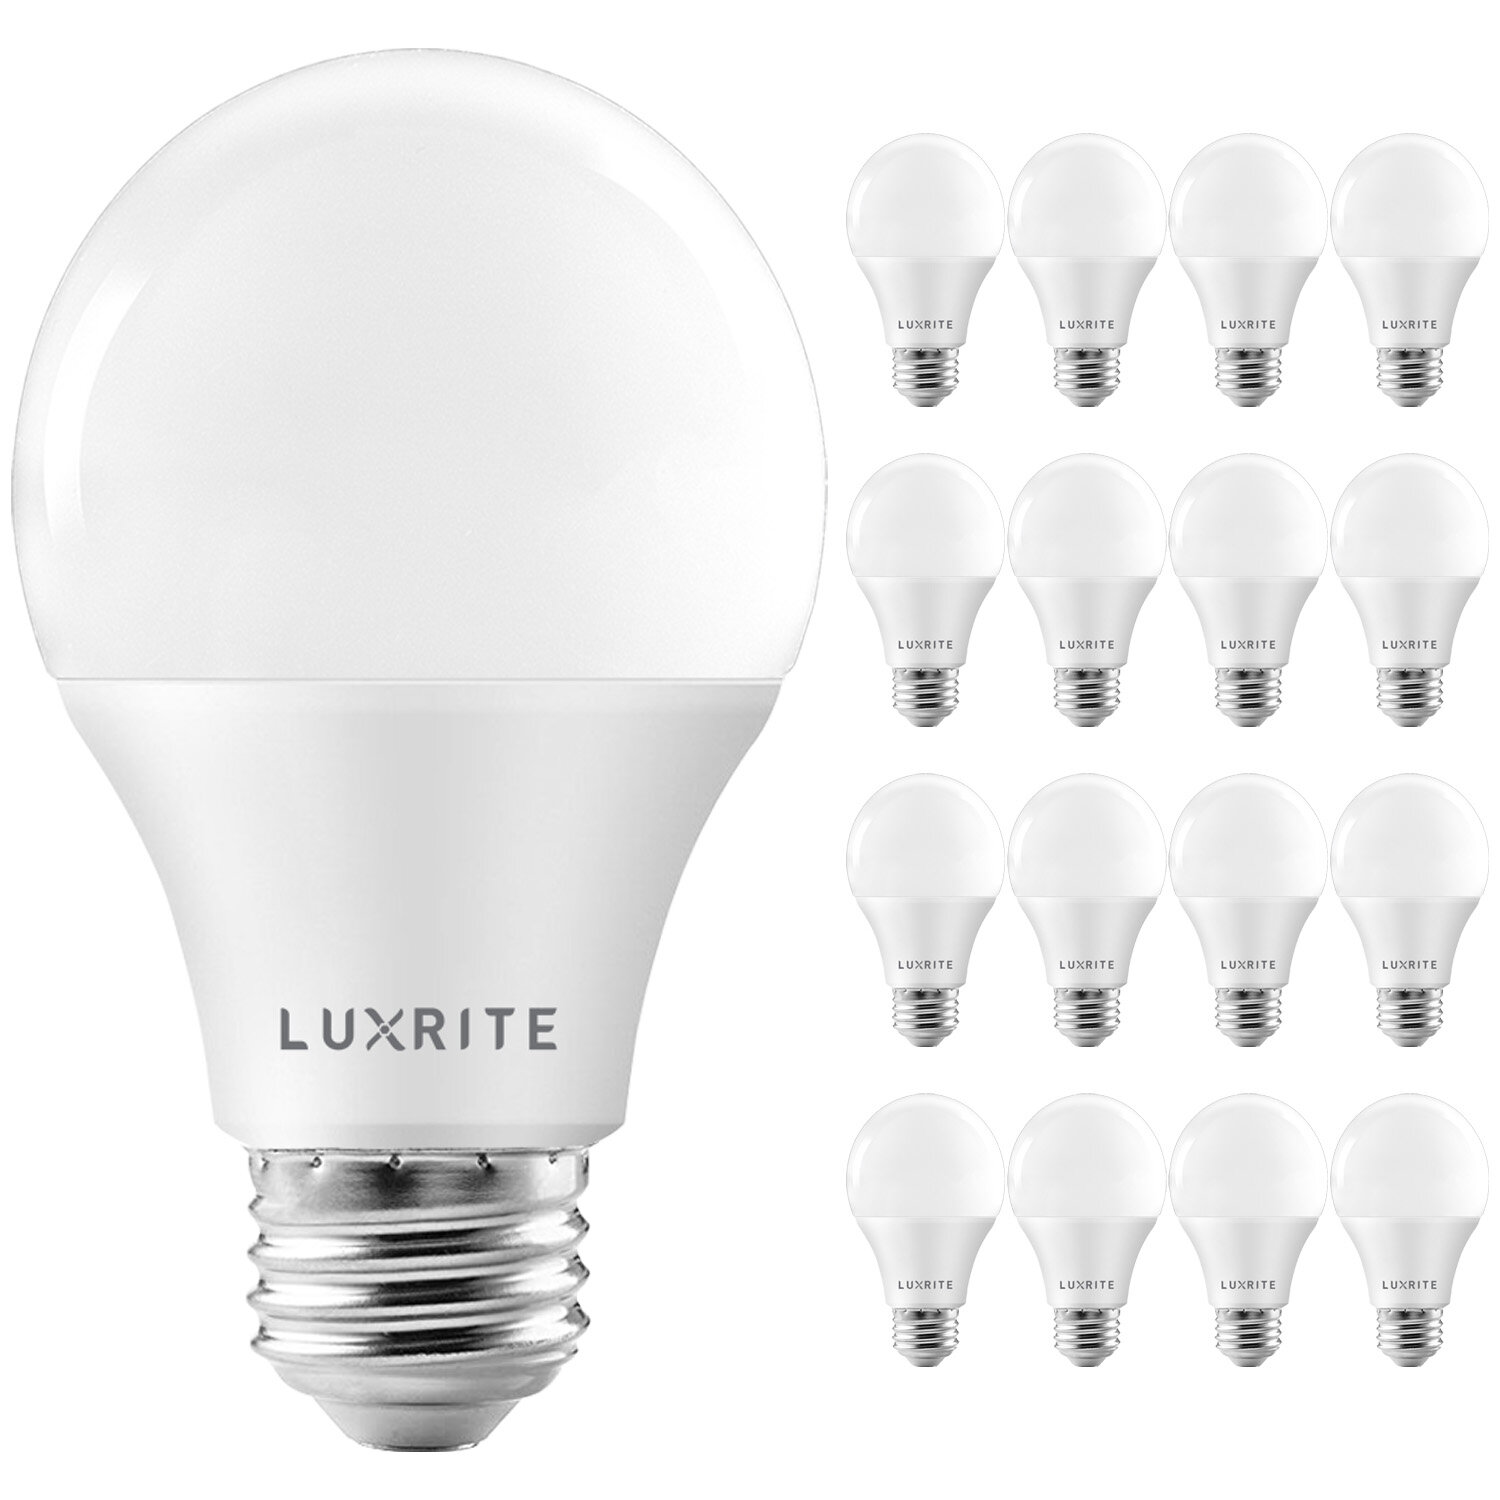 Luxrite A19 LED Bulb 75W Equivalent 1100 Lumens 3000K Warm Dimmable 11W Enclosed Fixture Rated Energy E26 Base 16 Pack | Wayfair